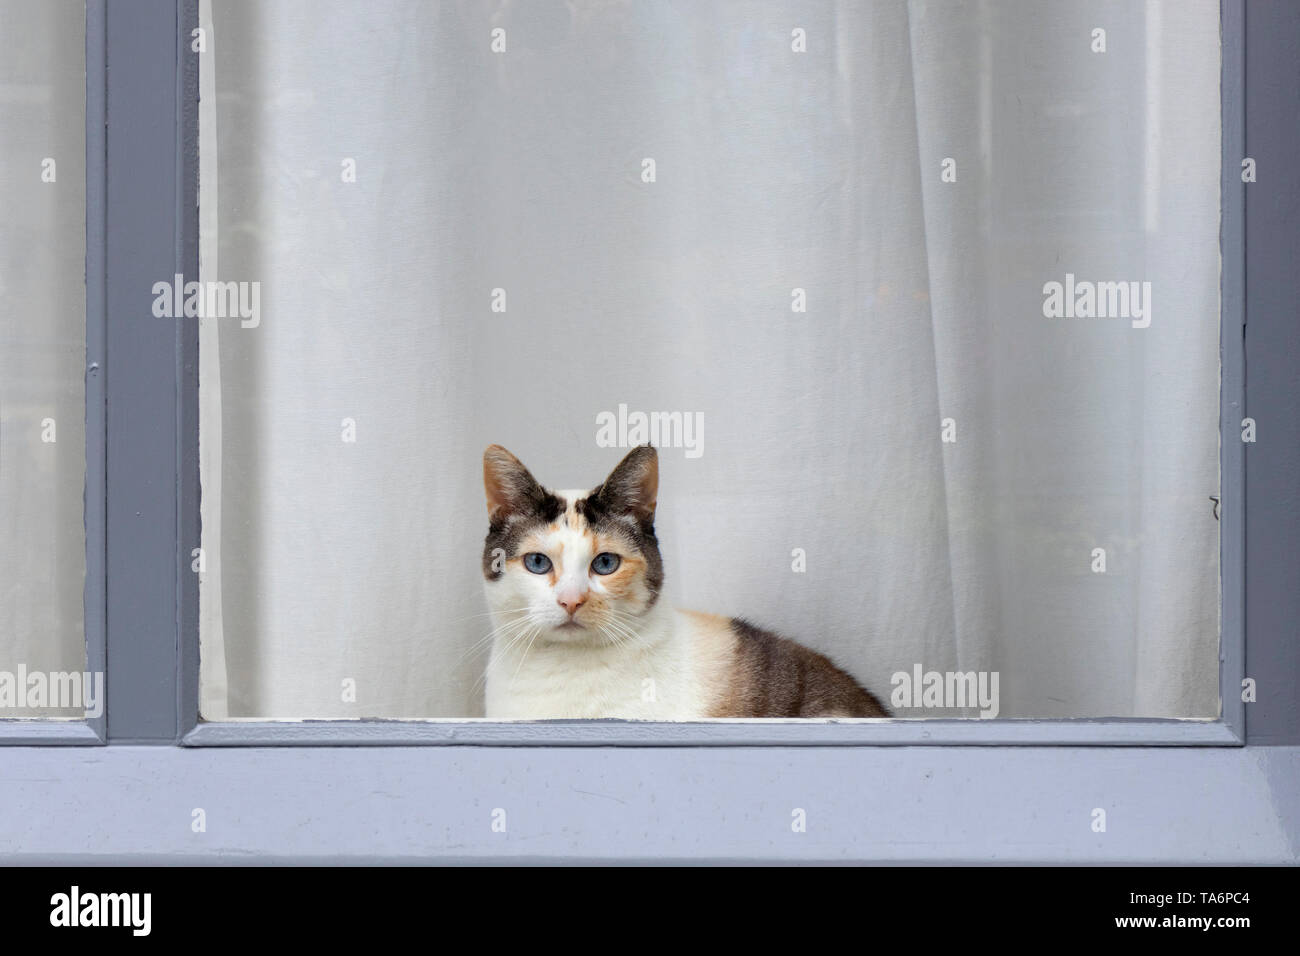 Calico cat with blue eyes sitting in the window sill looking into camera Stock Photo